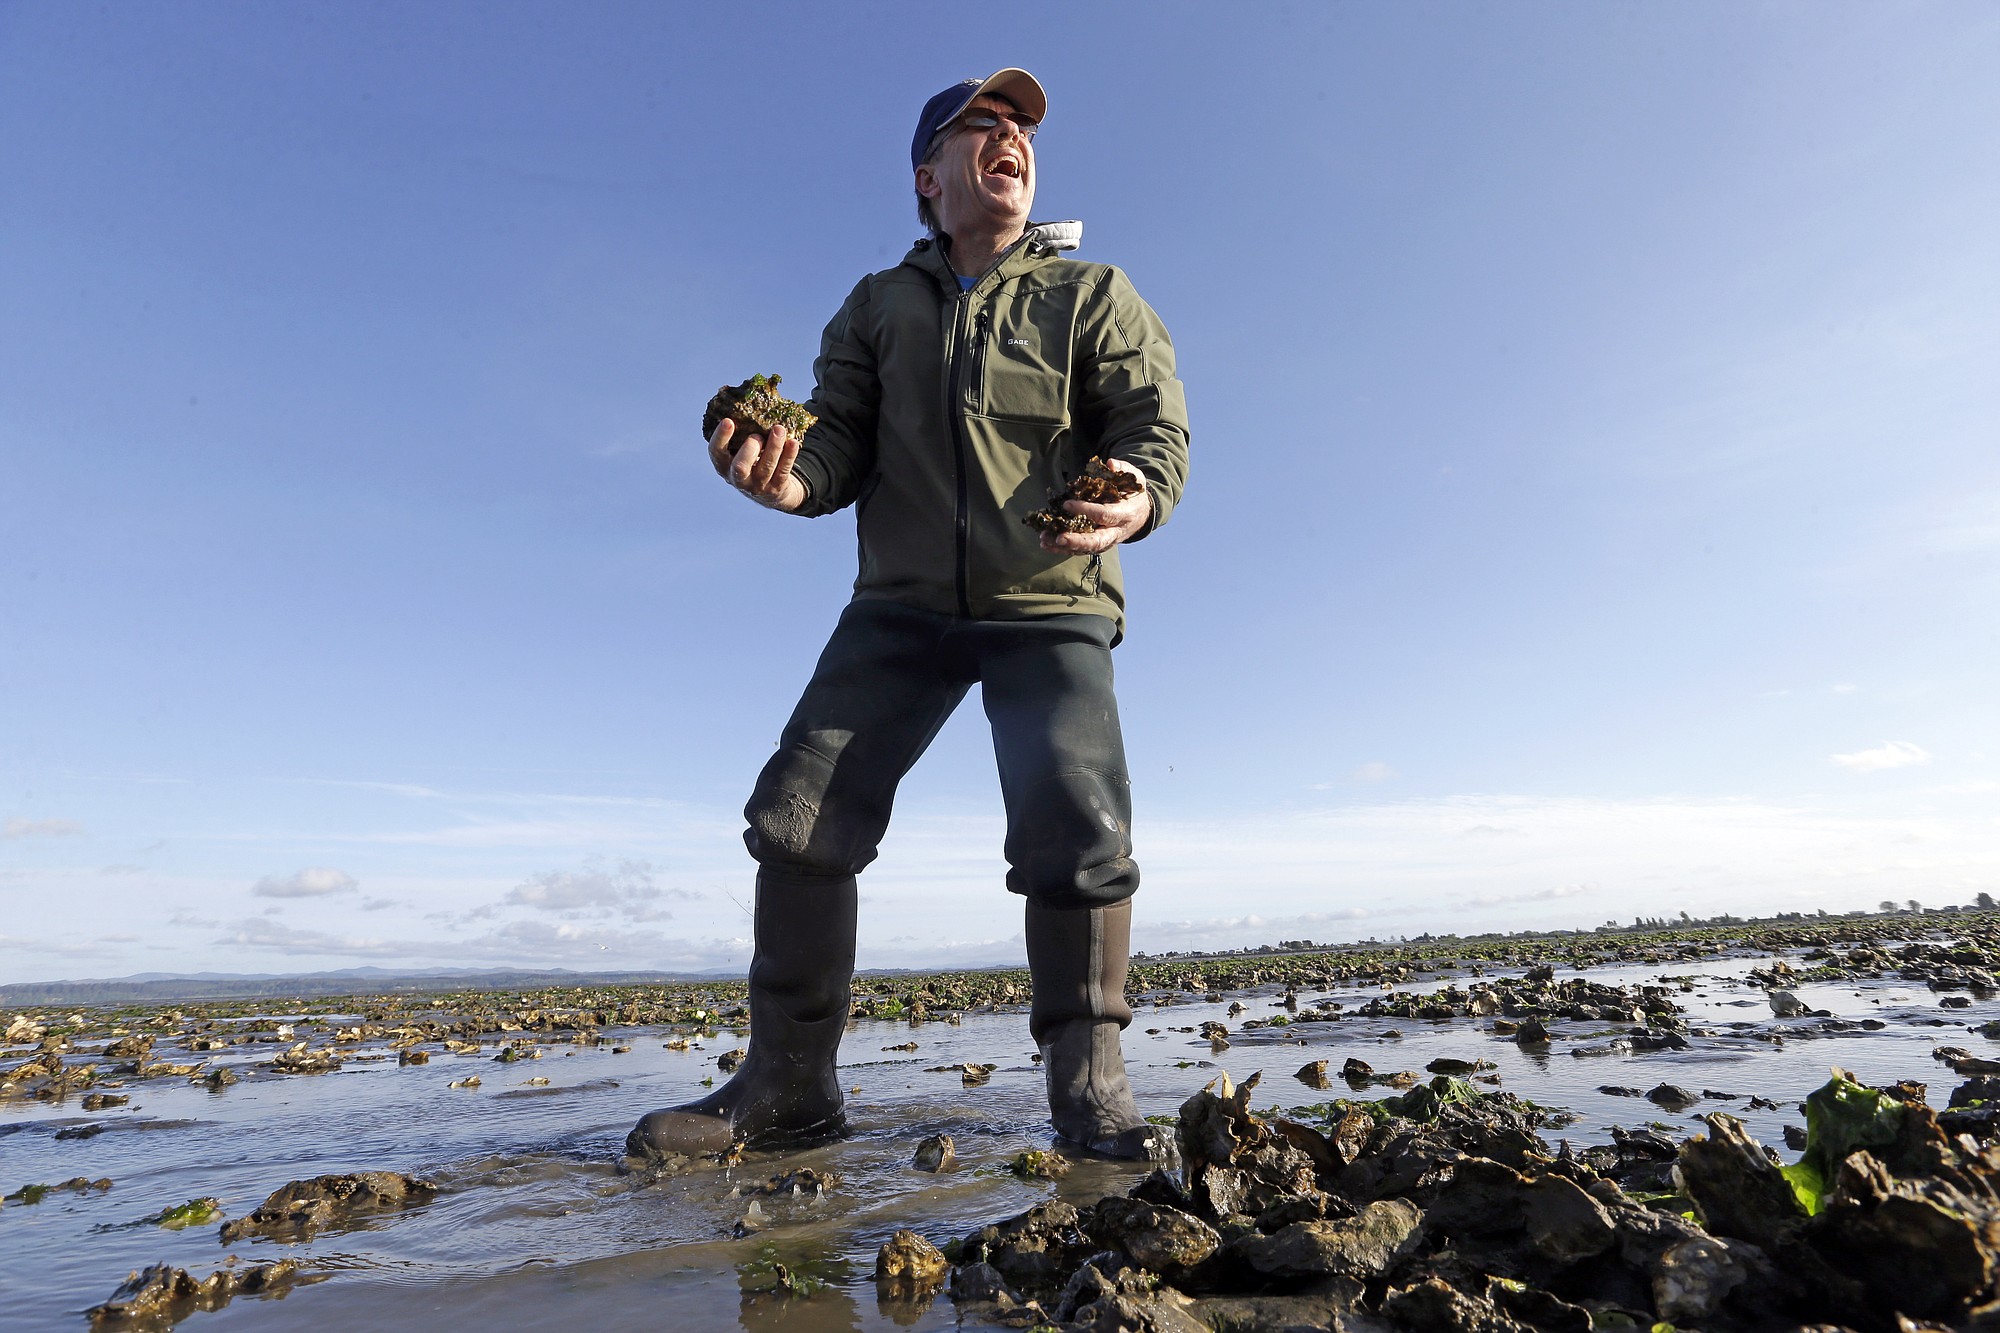 Eric Hall, a manager for Taylor Shellfish, smiles as he looks up after picking up a handful of oysters he planned to snack on Friday, May 1, 2015, at low tide in Willapa Bay near Tokeland, Wash.   Washington oyster growers are preparing to spray up to 2,000 acres of commercial shellfish beds after winning state approval to use a neurotoxic pesticide to control a native burrowing shrimp that threatens the shellfish industry.